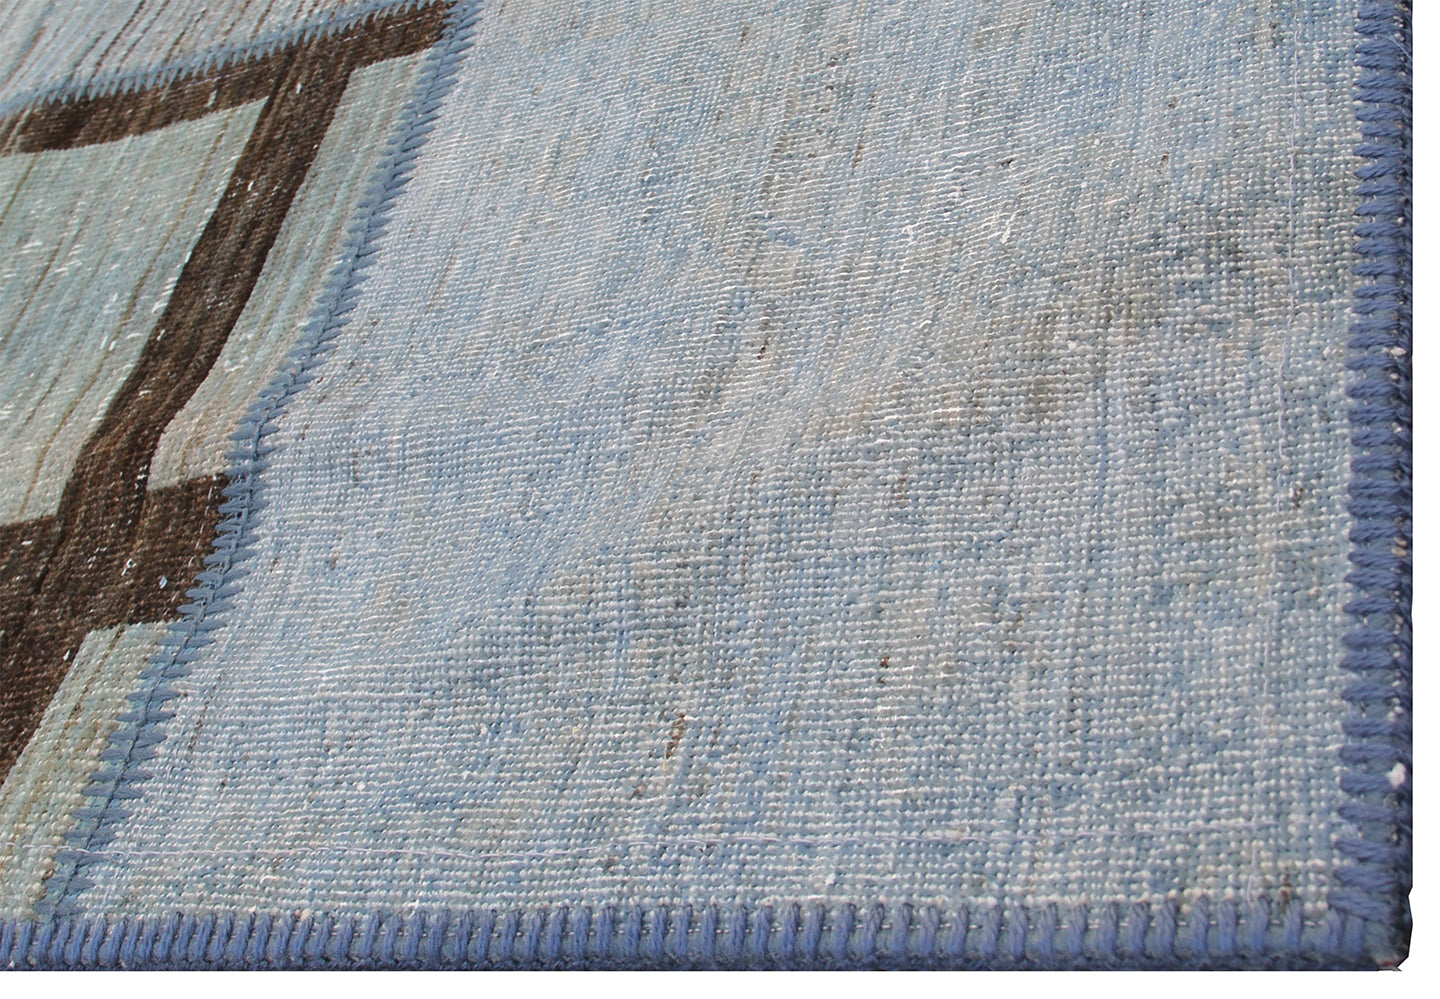 6'x8' Blue and Gray Ariana Patchwork Rug